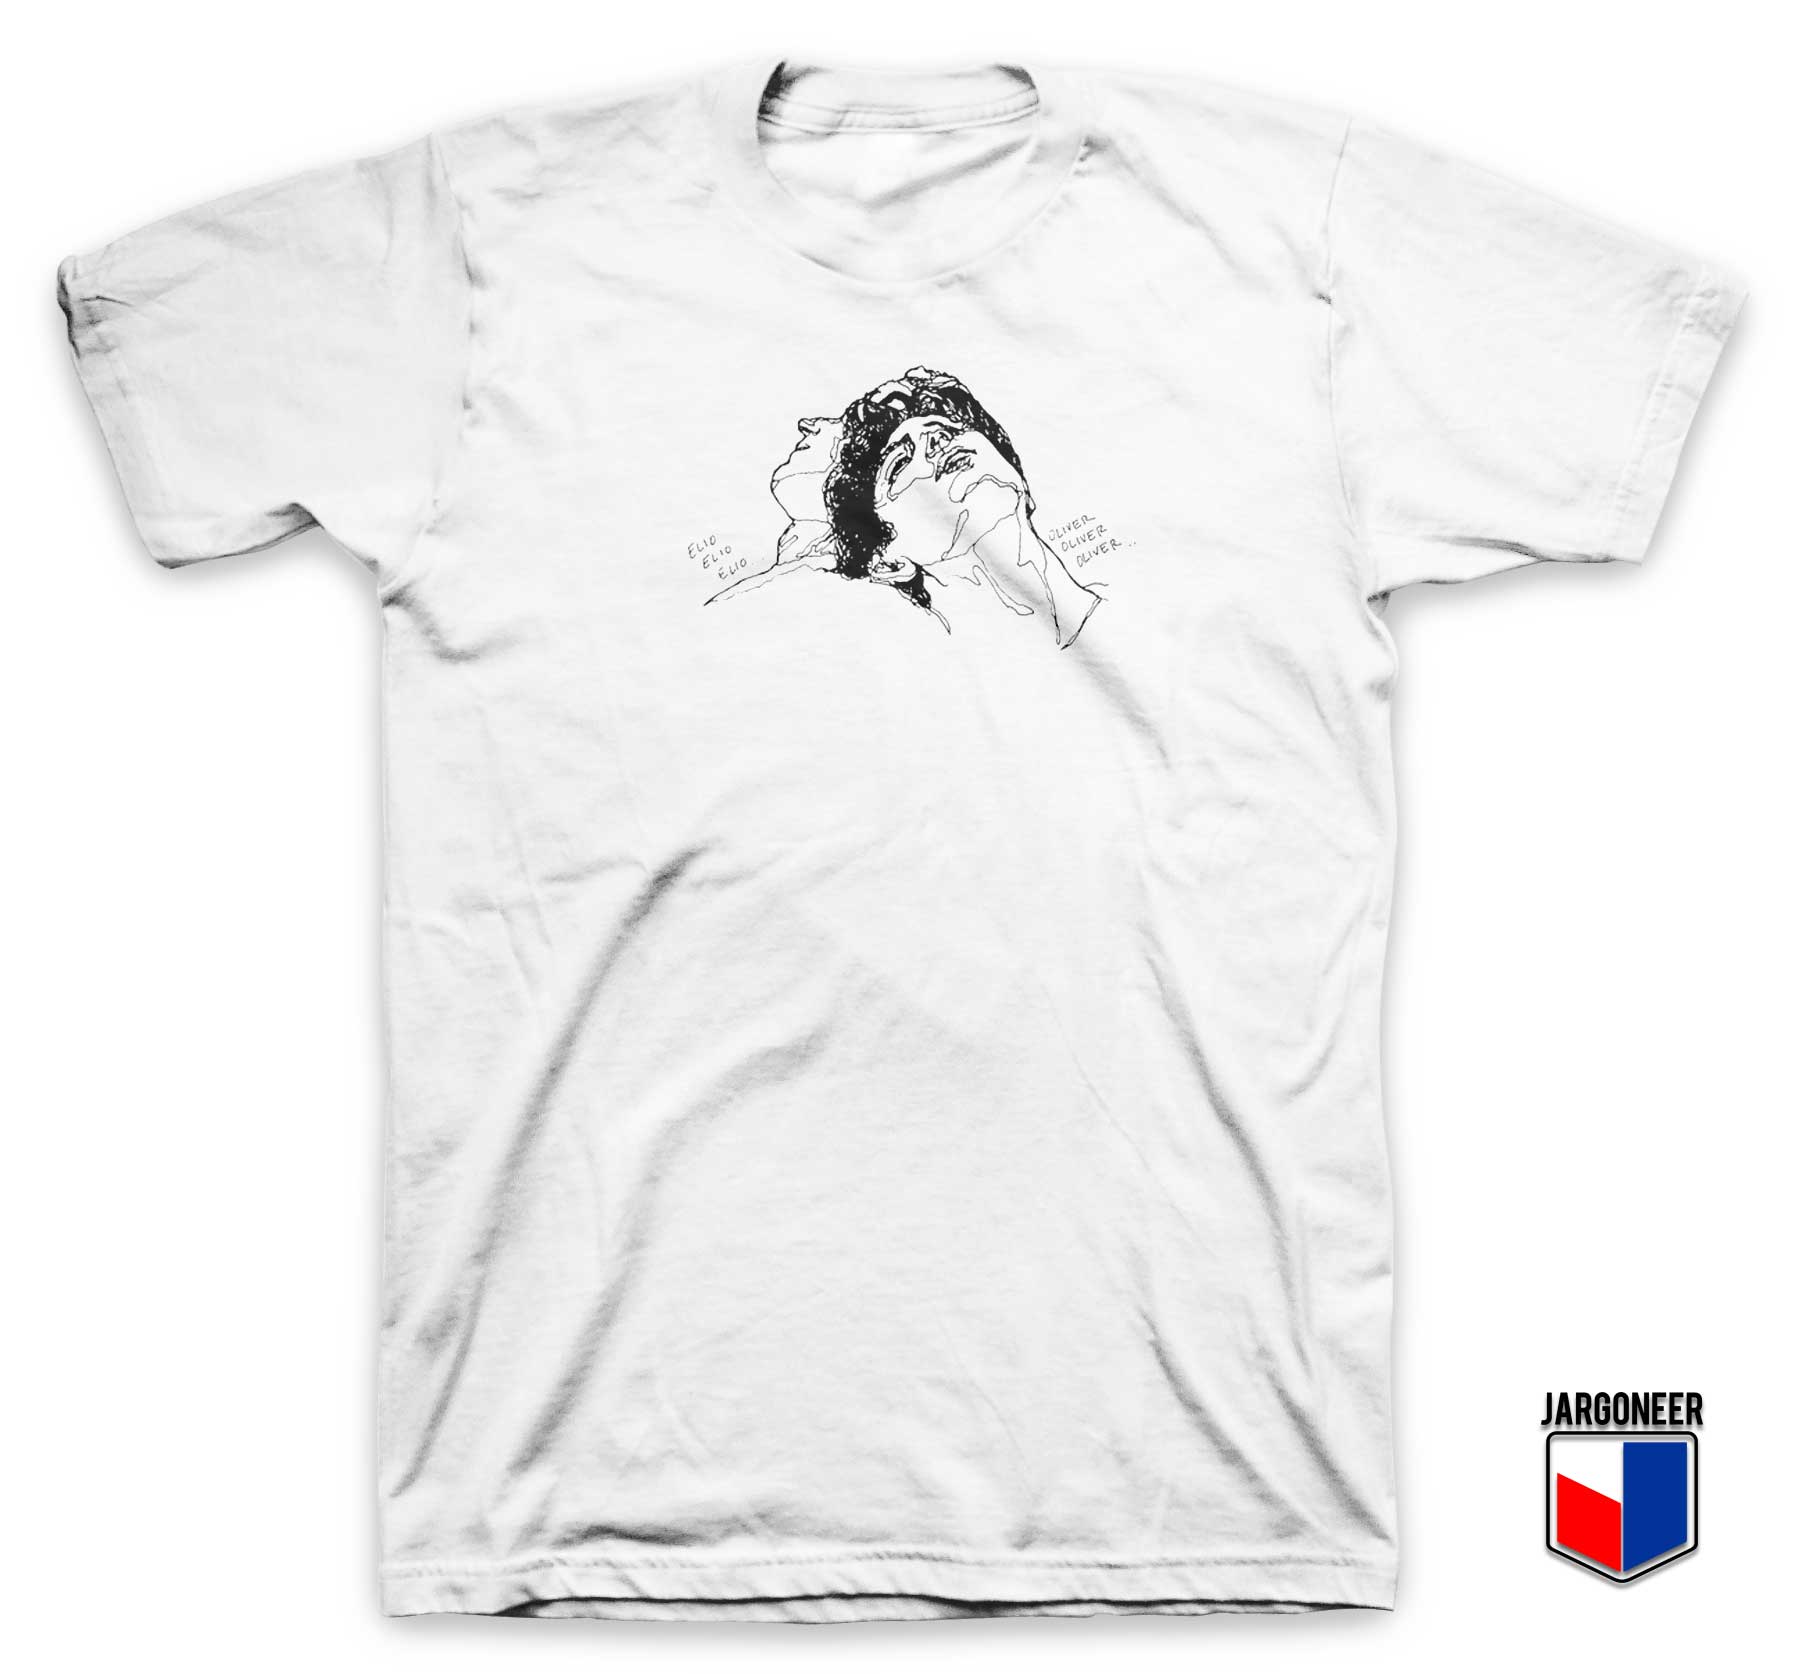 Elio Oliver Call Me By Your Name T Shirt - Shop Unique Graphic Cool Shirt Designs